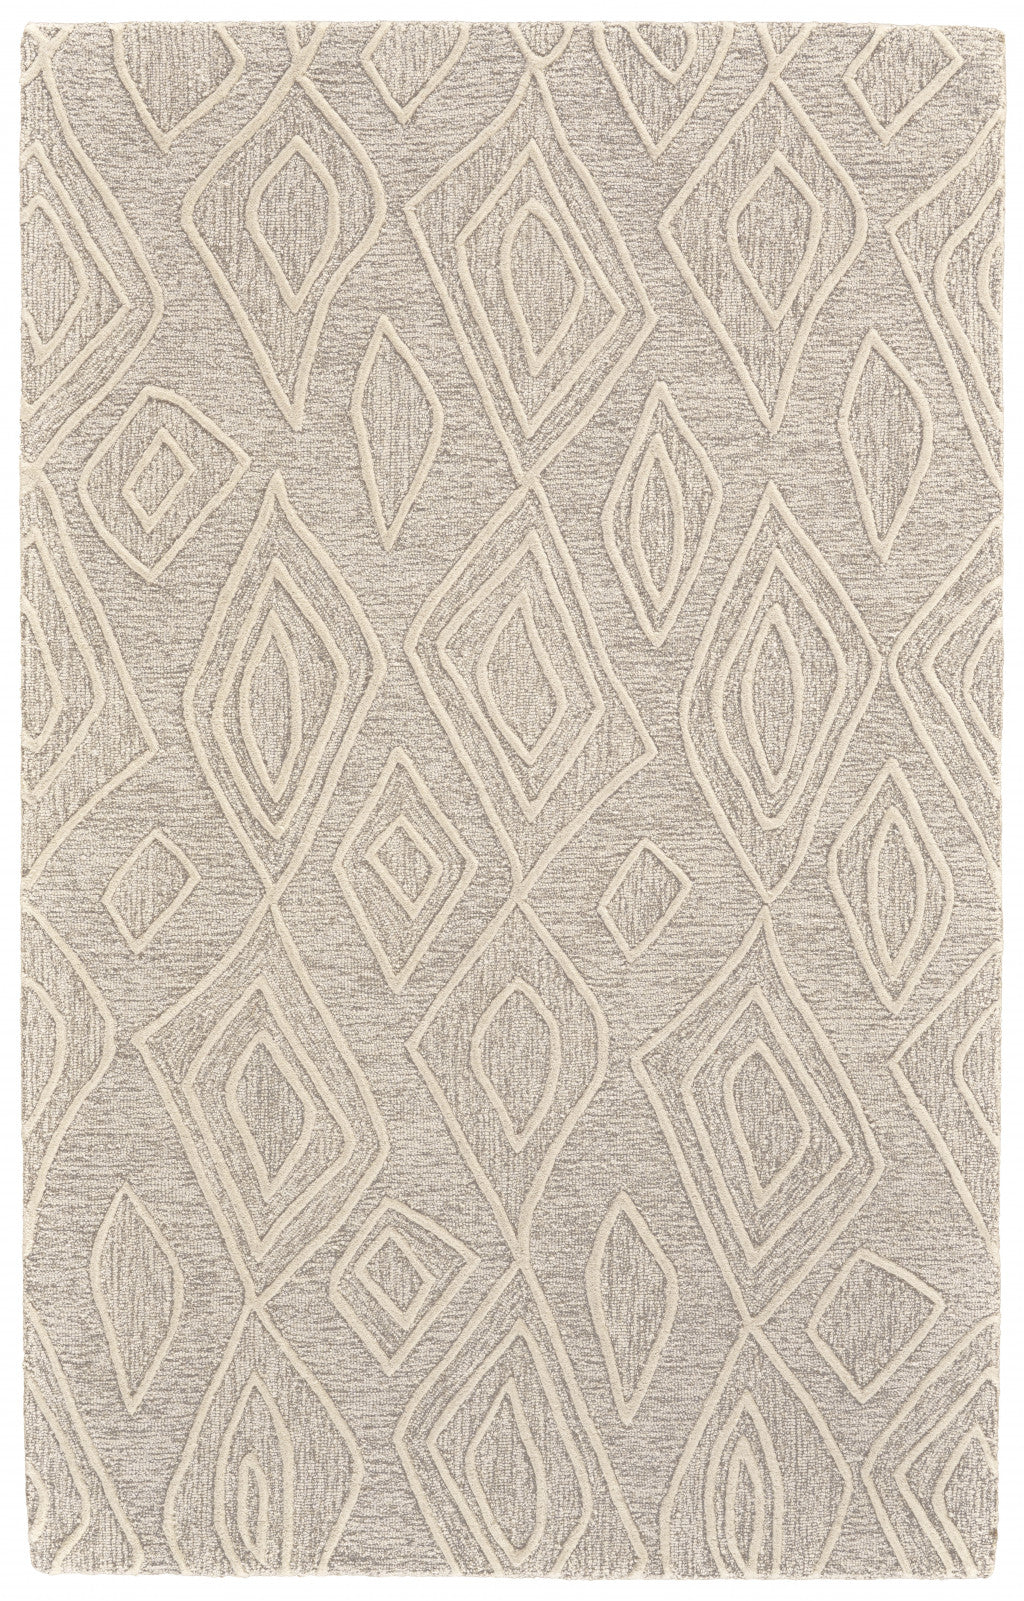 4' X 6' Tan And Ivory Wool Geometric Tufted Handmade Stain Resistant Area Rug